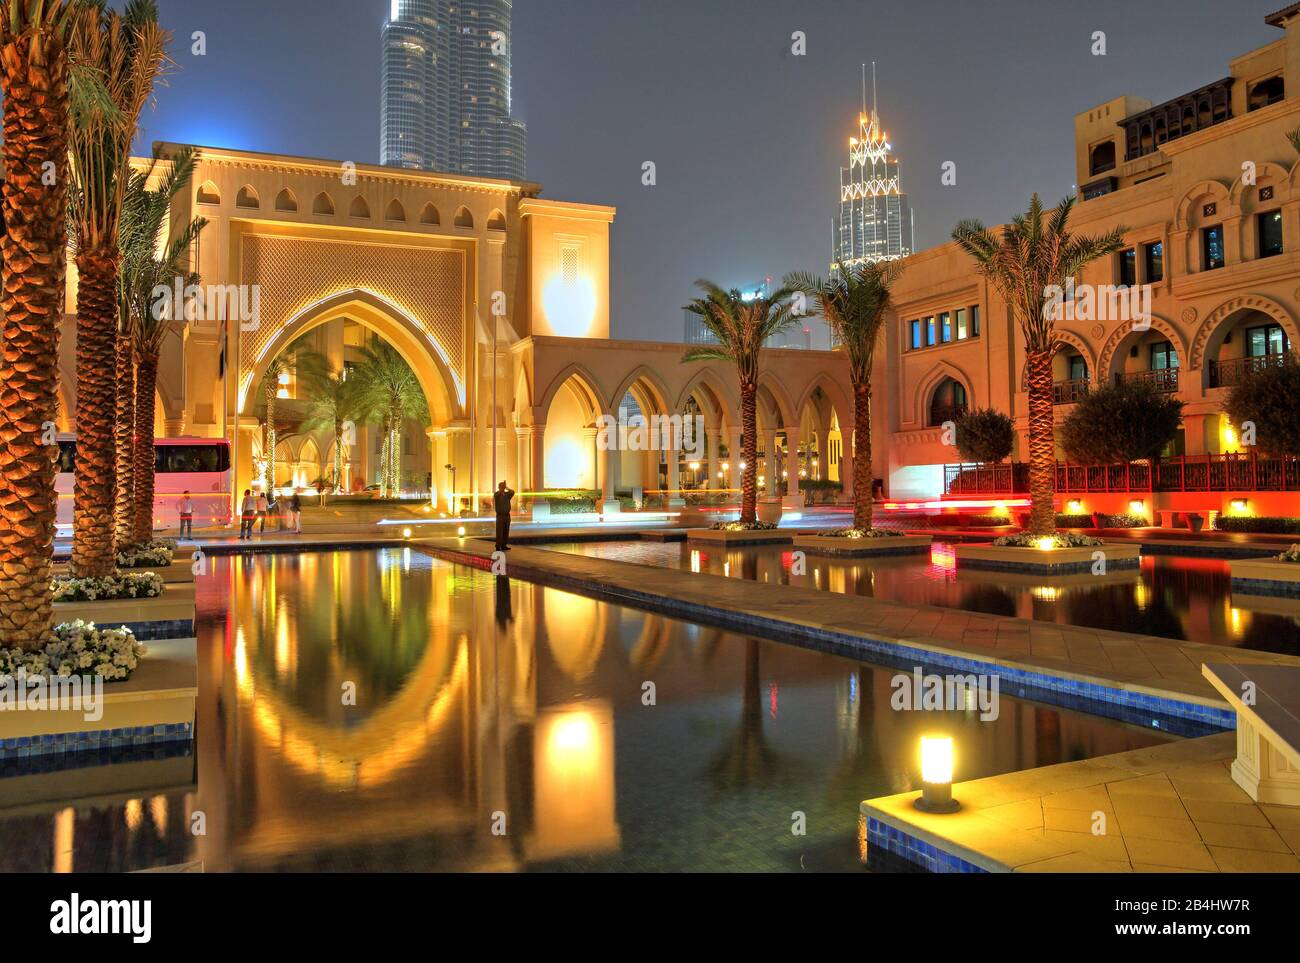 Water basin and entrance gate of The Palace Downtown hotel at night in Downtown, Dubai, Persian Gulf, United Arab Emirates Stock Photo